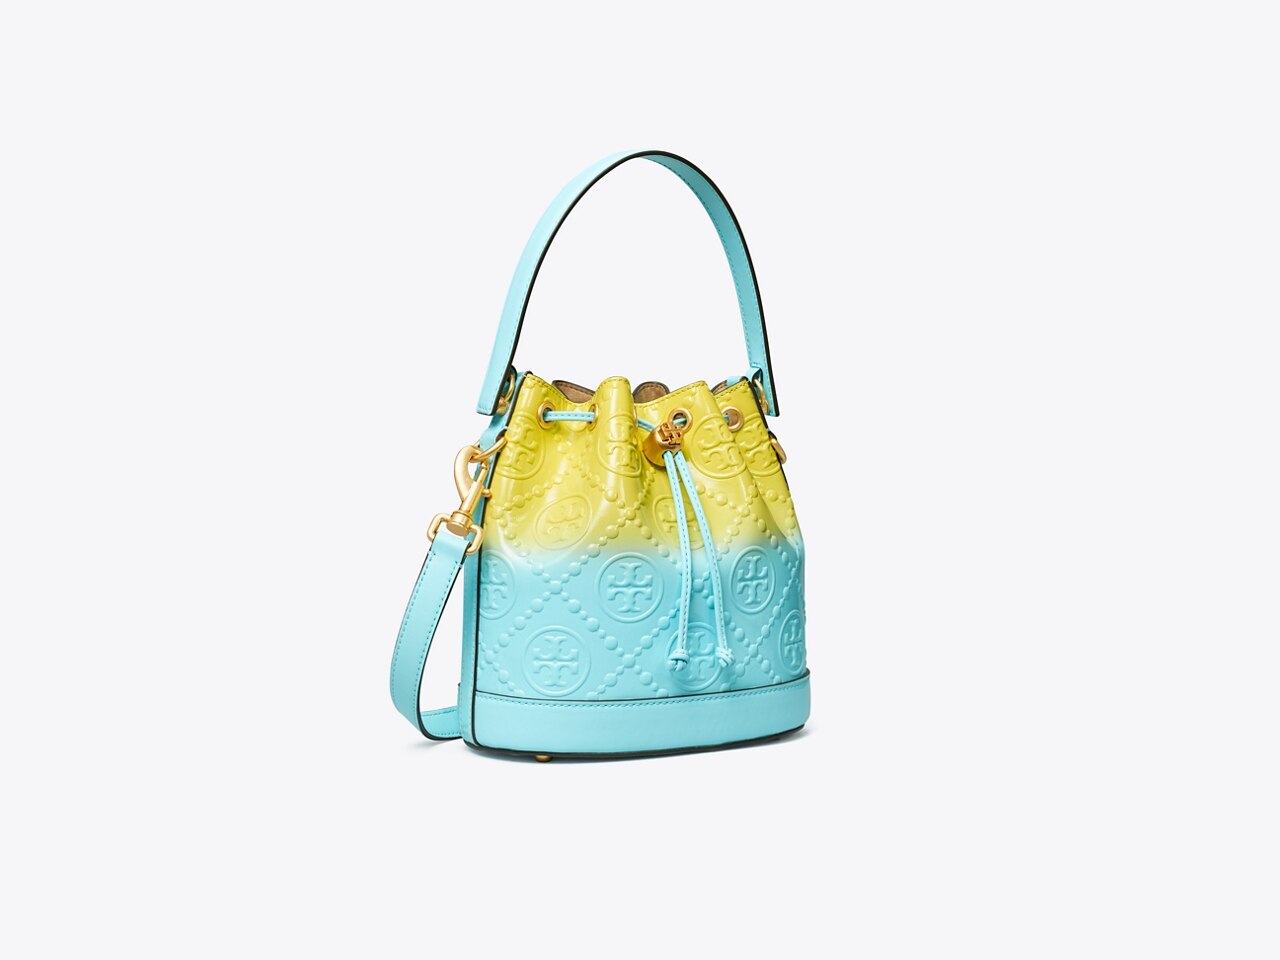 Tory Burch on X: The perfect bucket bag for summer in indigo